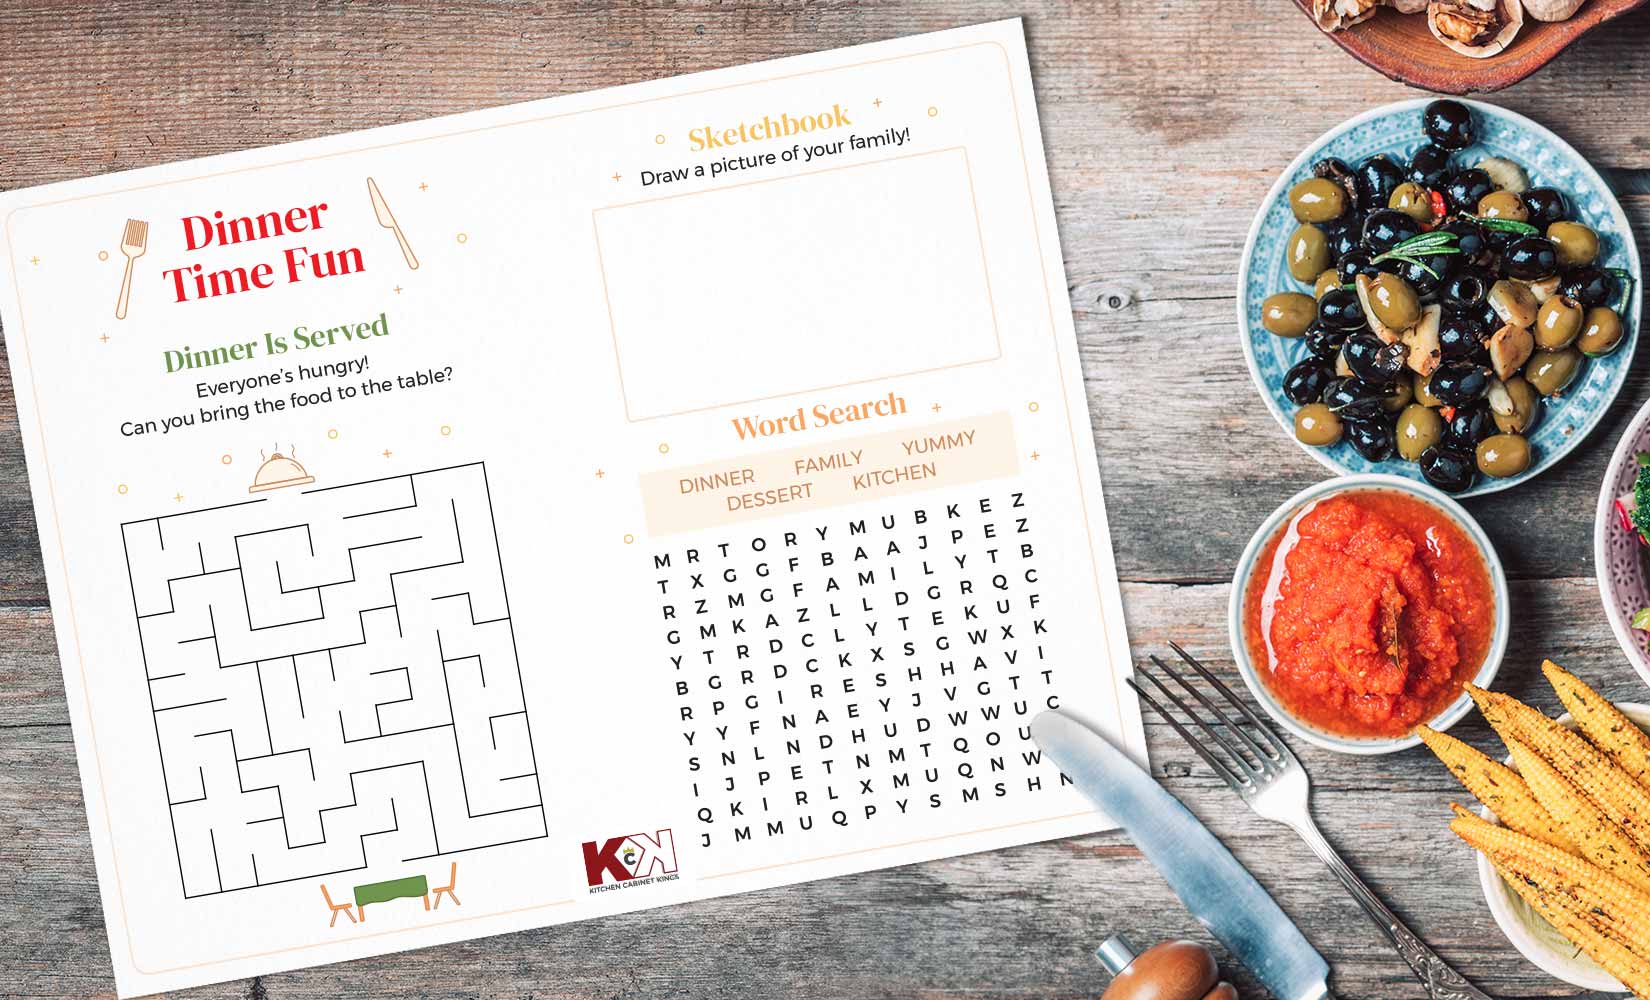 Fun dinner table placemat with maze, word search, and drawing section next to served food